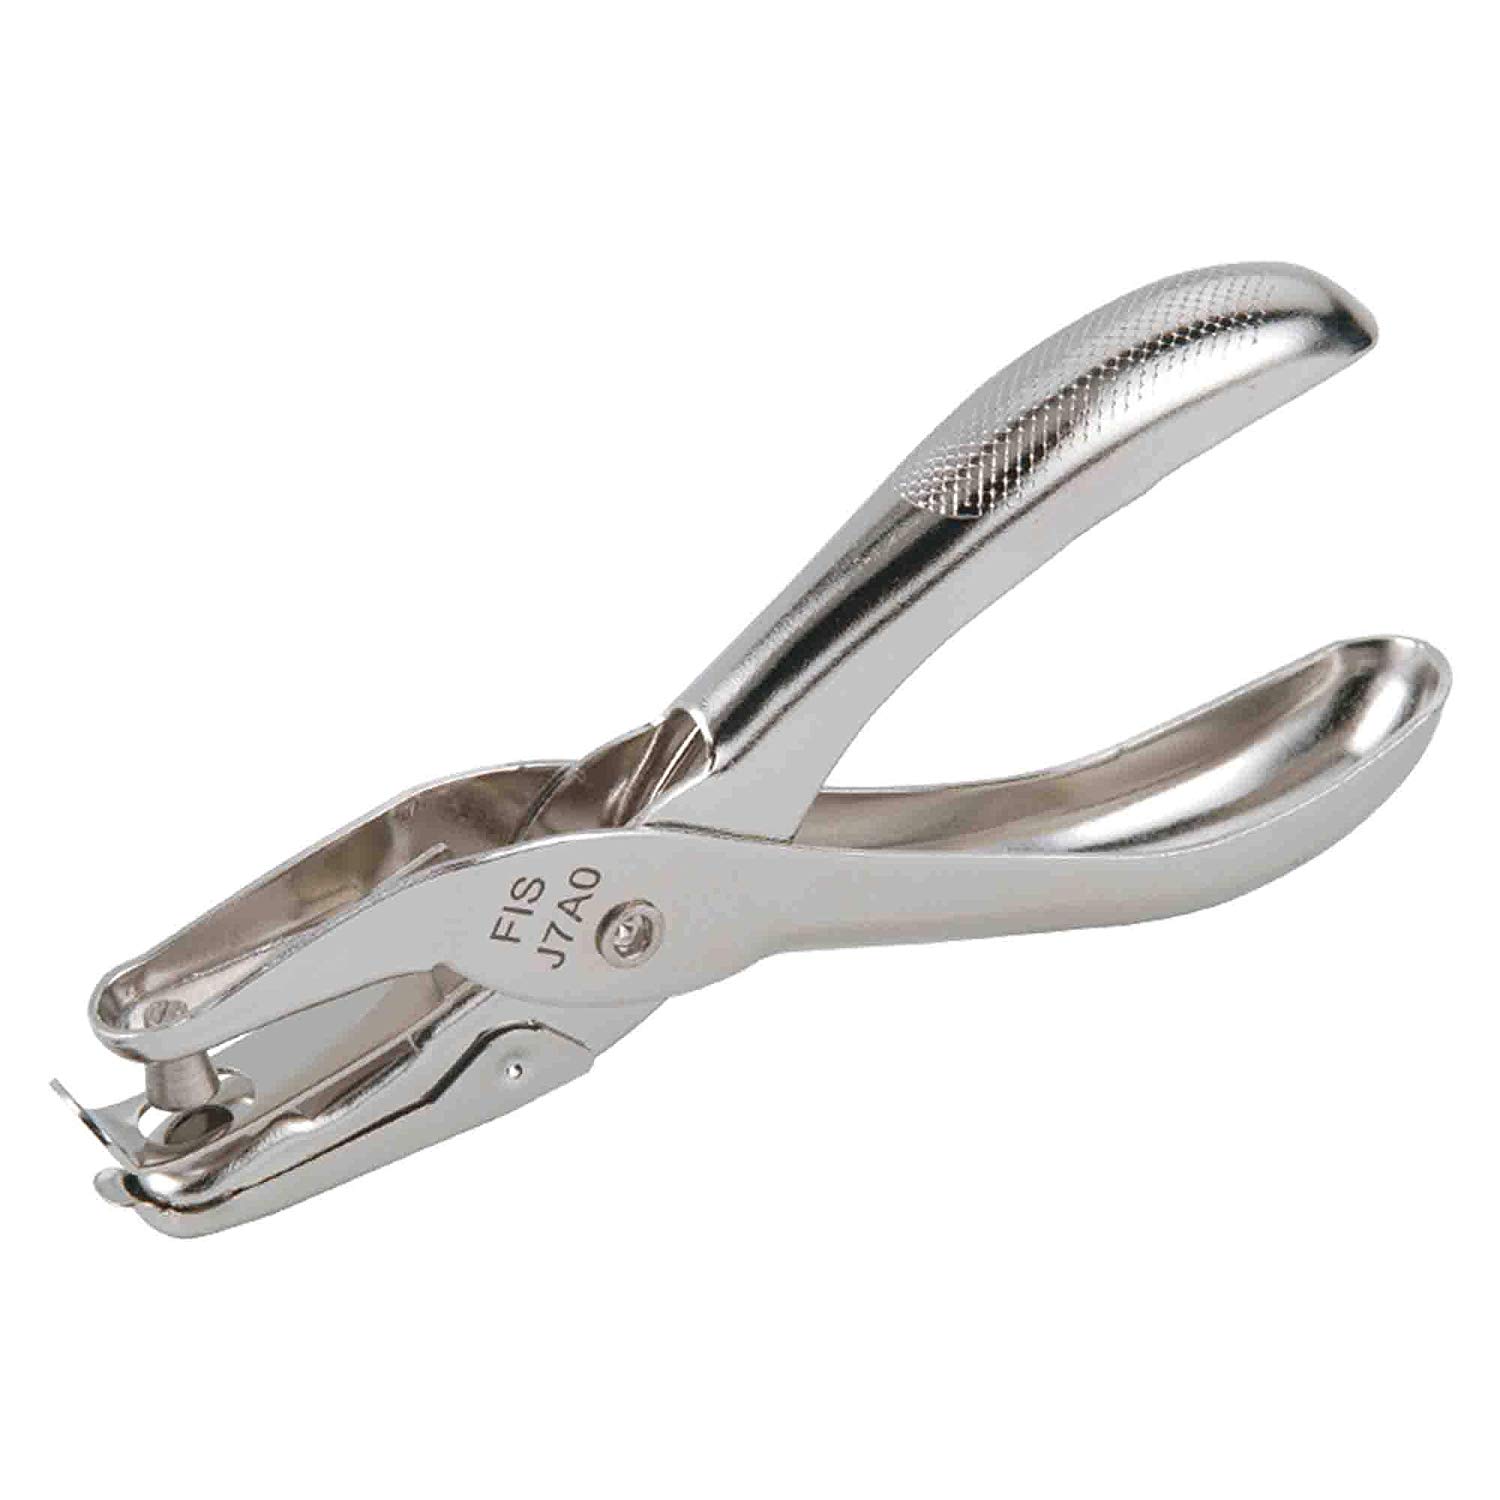 FIS FSPUJ7A0 8-sheets Capacity Plier 1-Hole Punch - Silver (pc)